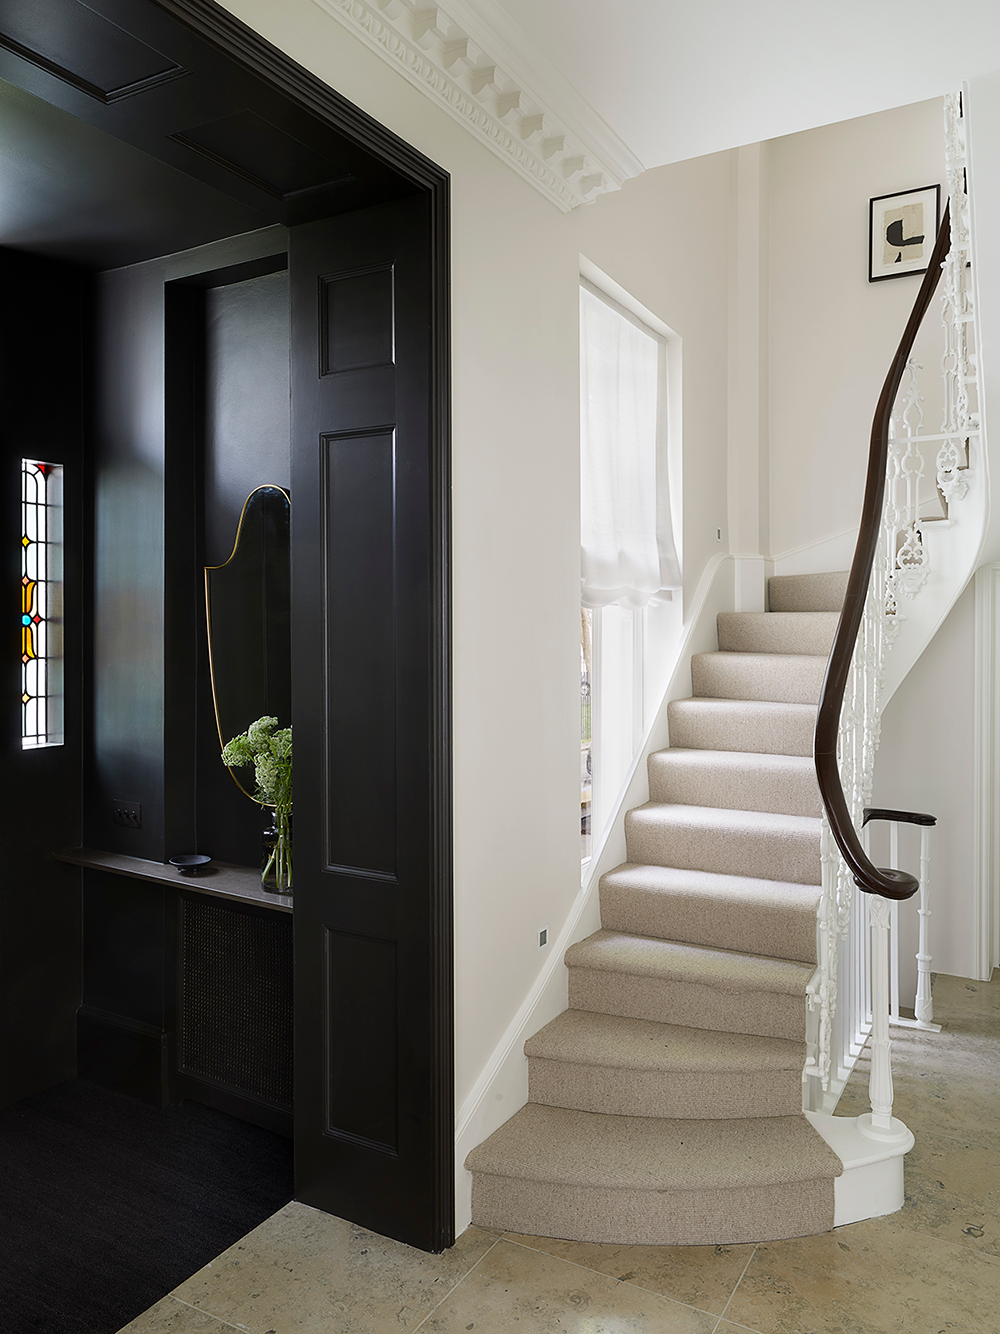 A striking black lobby with stained glass windows leads to a fresh and light hallway